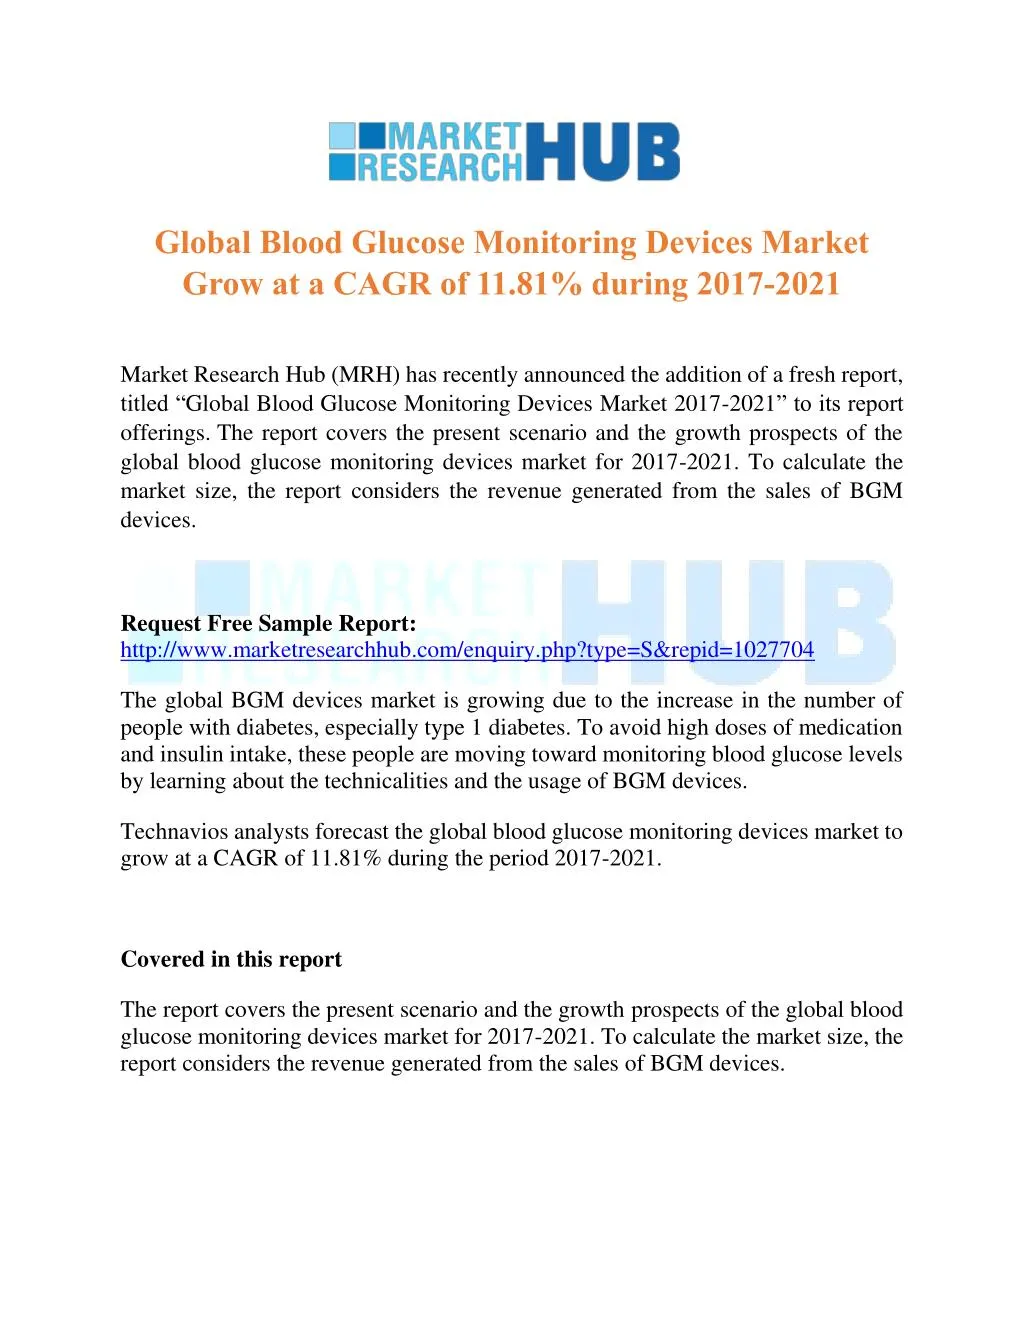 global blood glucose monitoring devices market